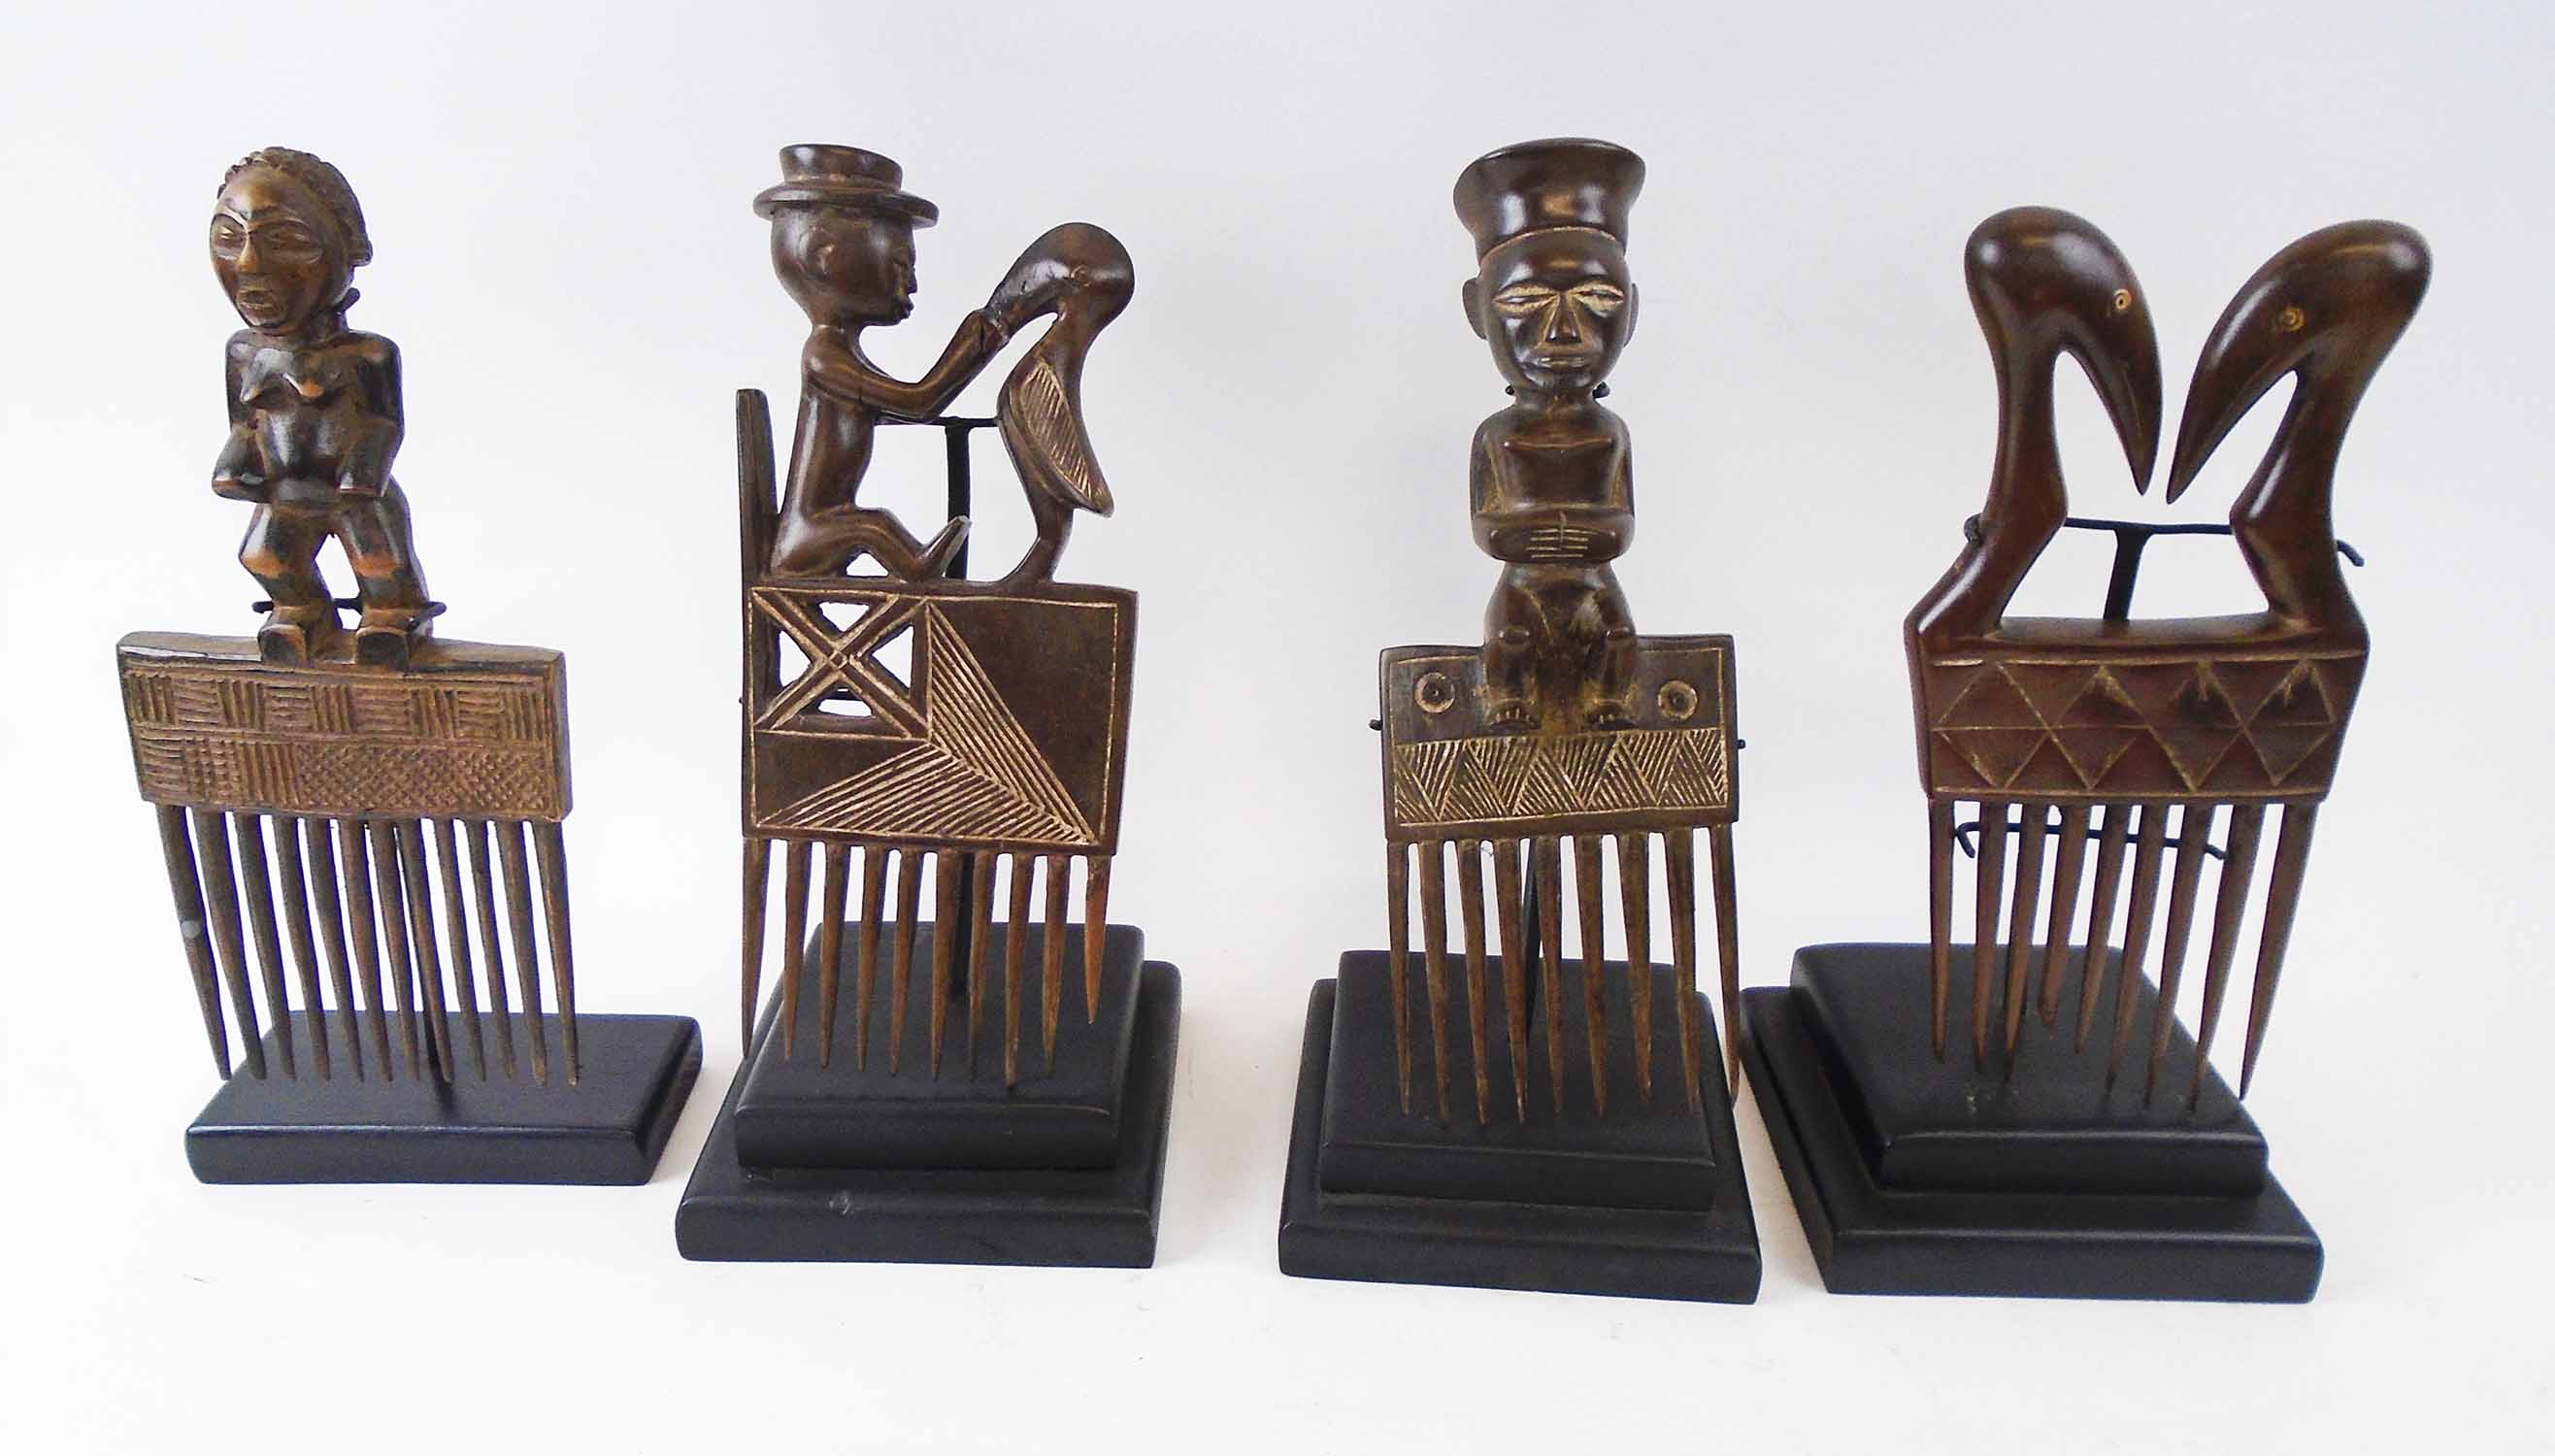 FOUR VARIOUS DECORATIVE COMBS, Cote d'Ivoire, carved wood, each approx. 27cm H, plus display stands.